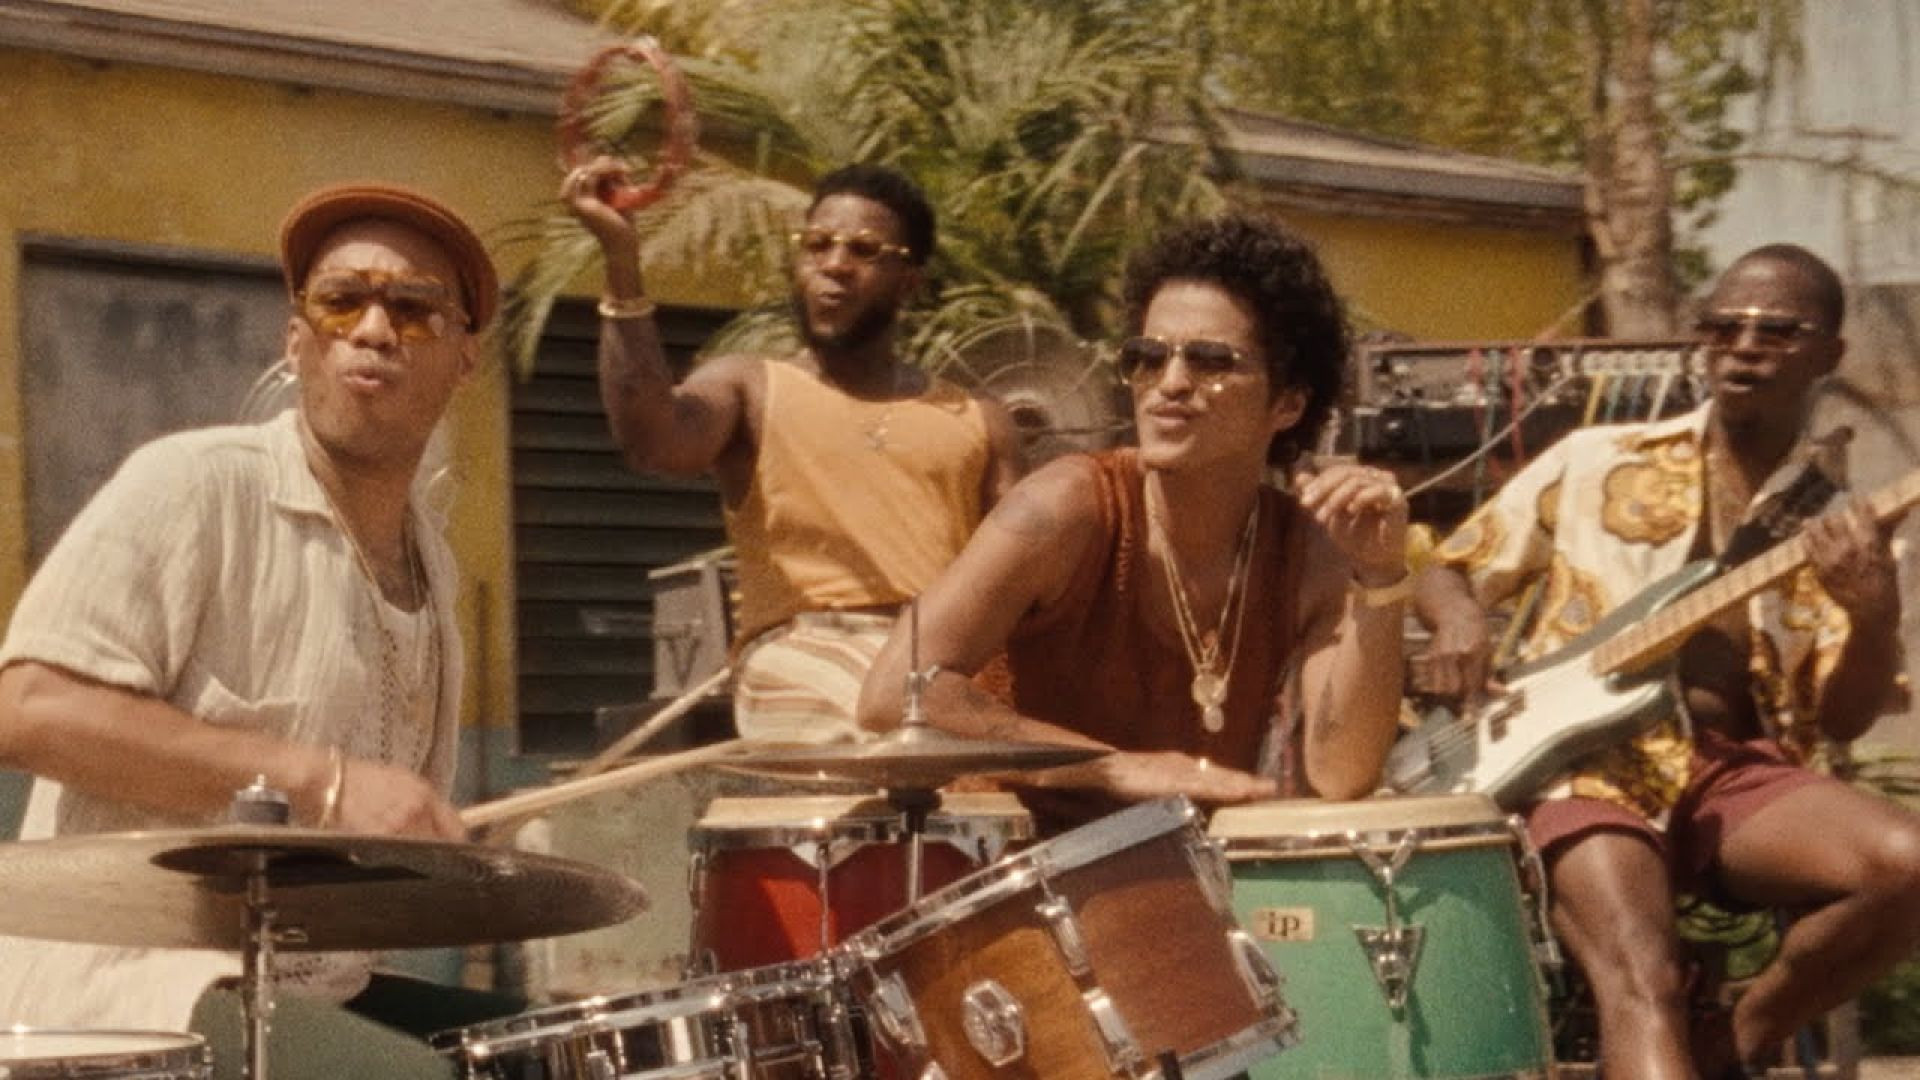 ⁣Bruno Mars, Anderson .Paak, Silk Sonic - Skate [Official Music Video]